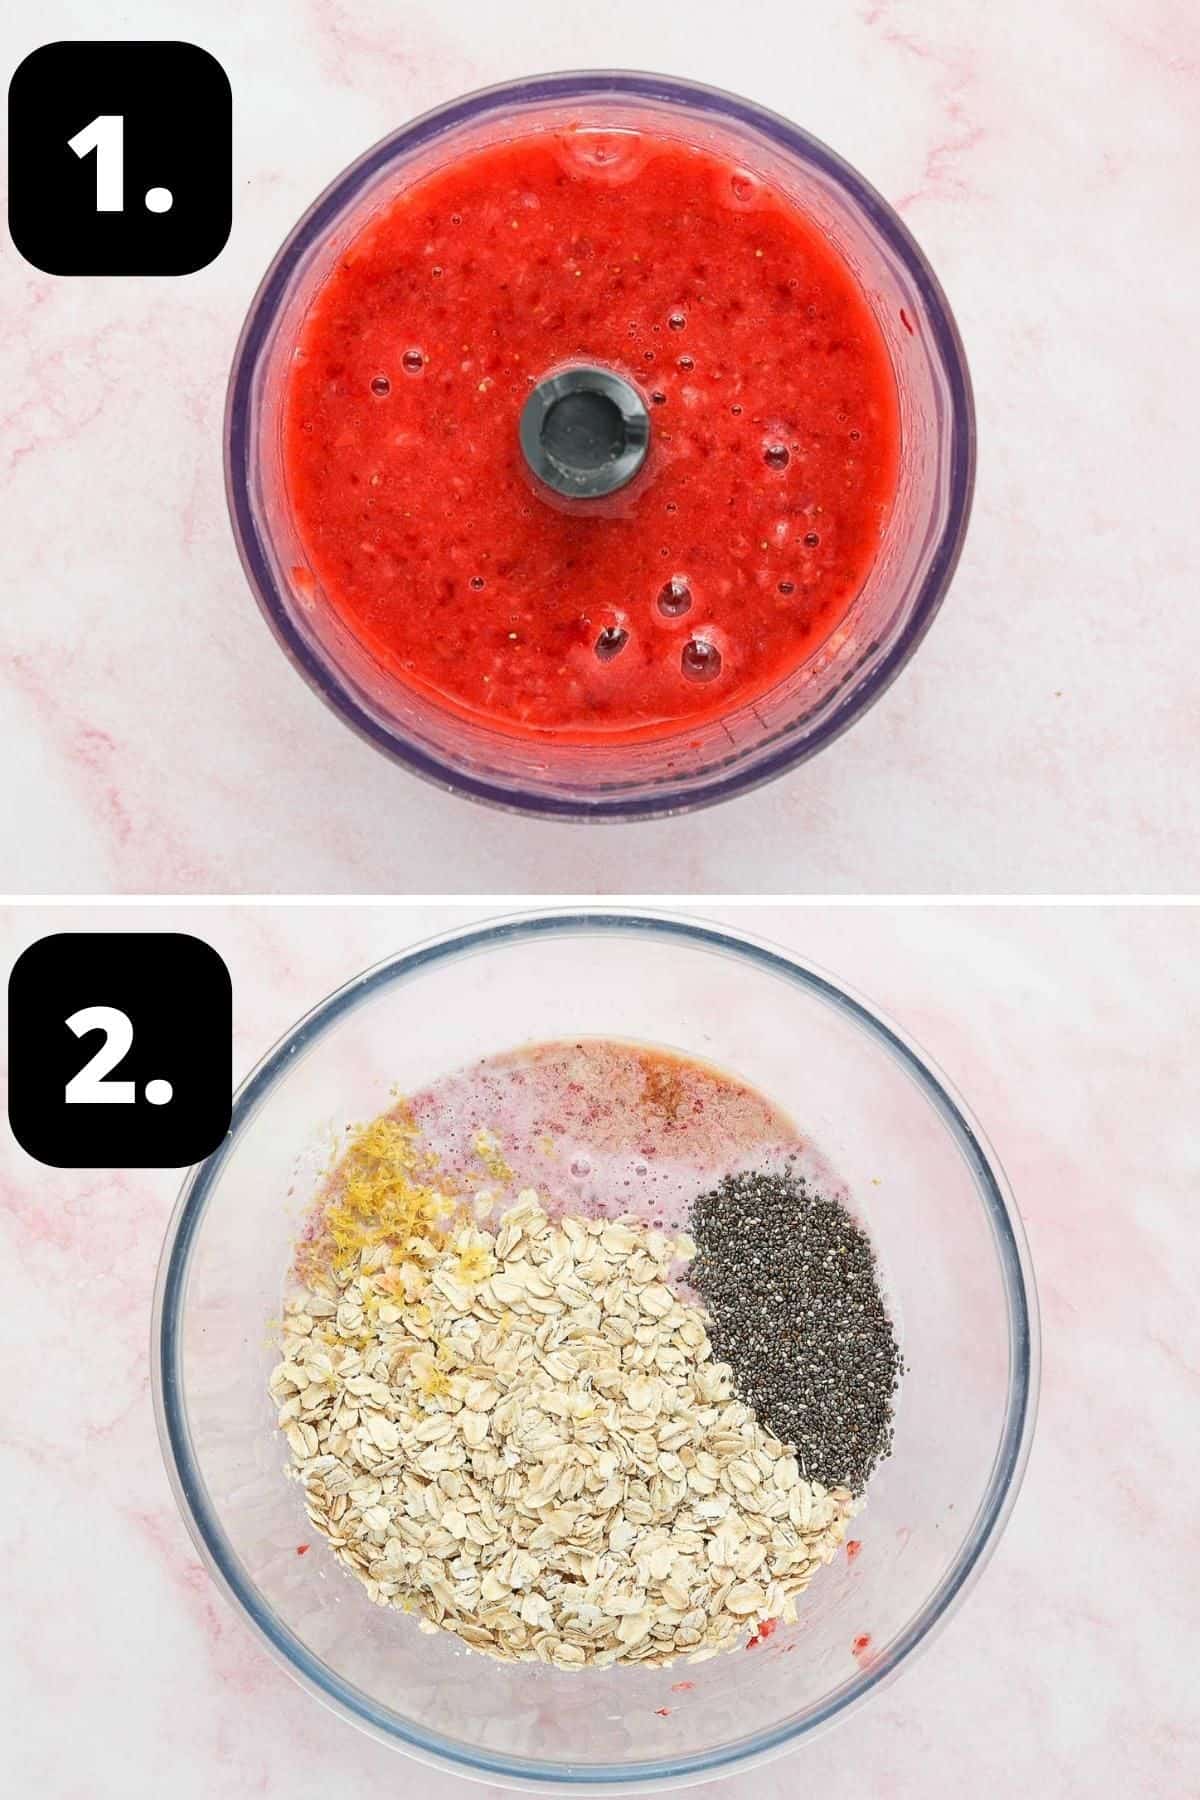 Steps 1-2 of preparing this recipe - the blended strawberry puree and all of the ingredients in a glass bowl.